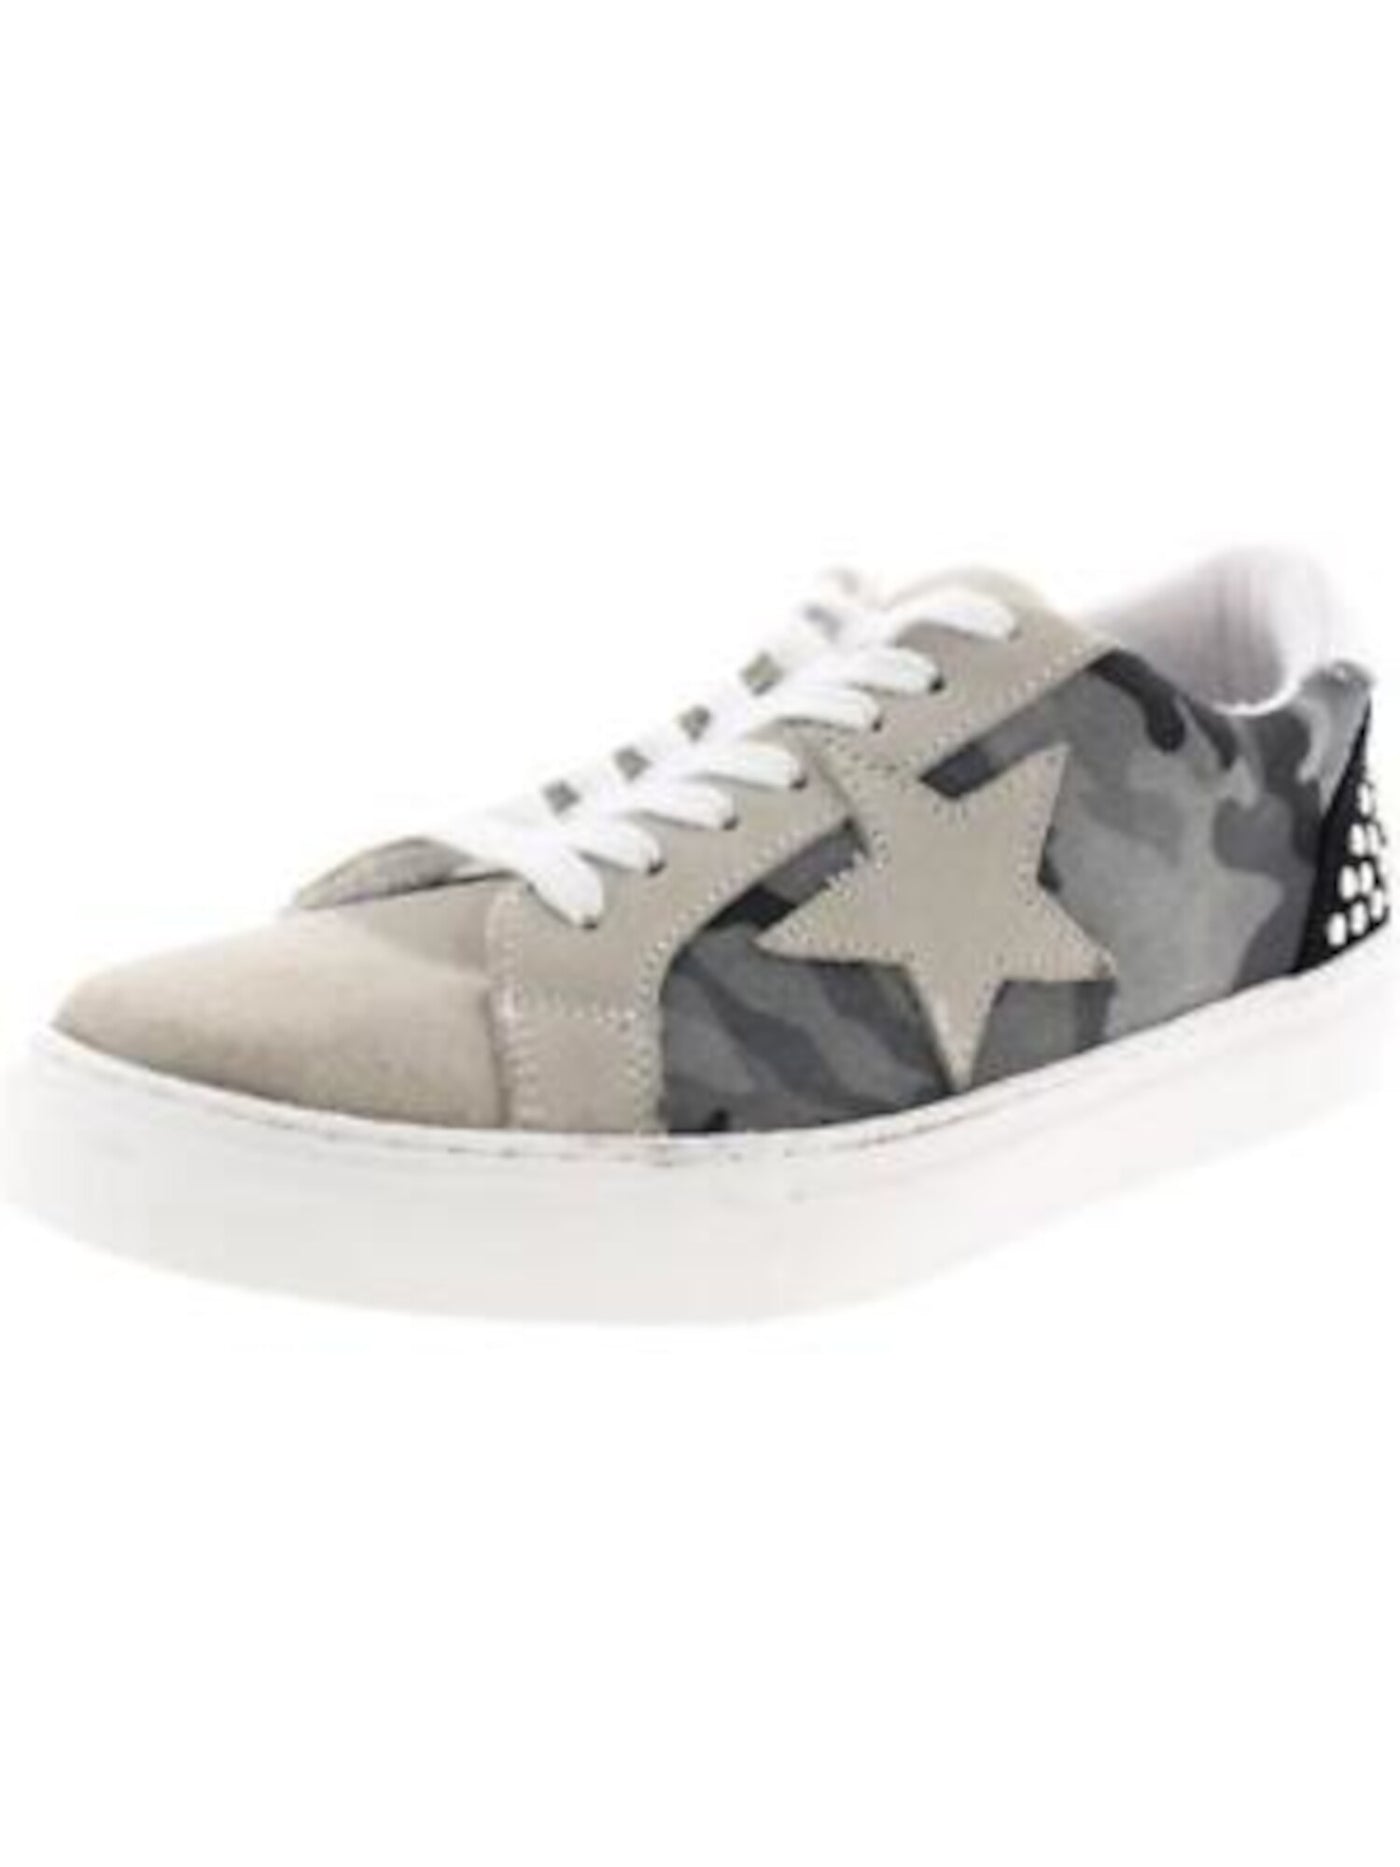 STEVEN NEW YORK Womens Beige Camouflage Star Studded Cushioned Pact Round Toe Platform Lace-Up Leather Athletic Sneakers Shoes 6 M